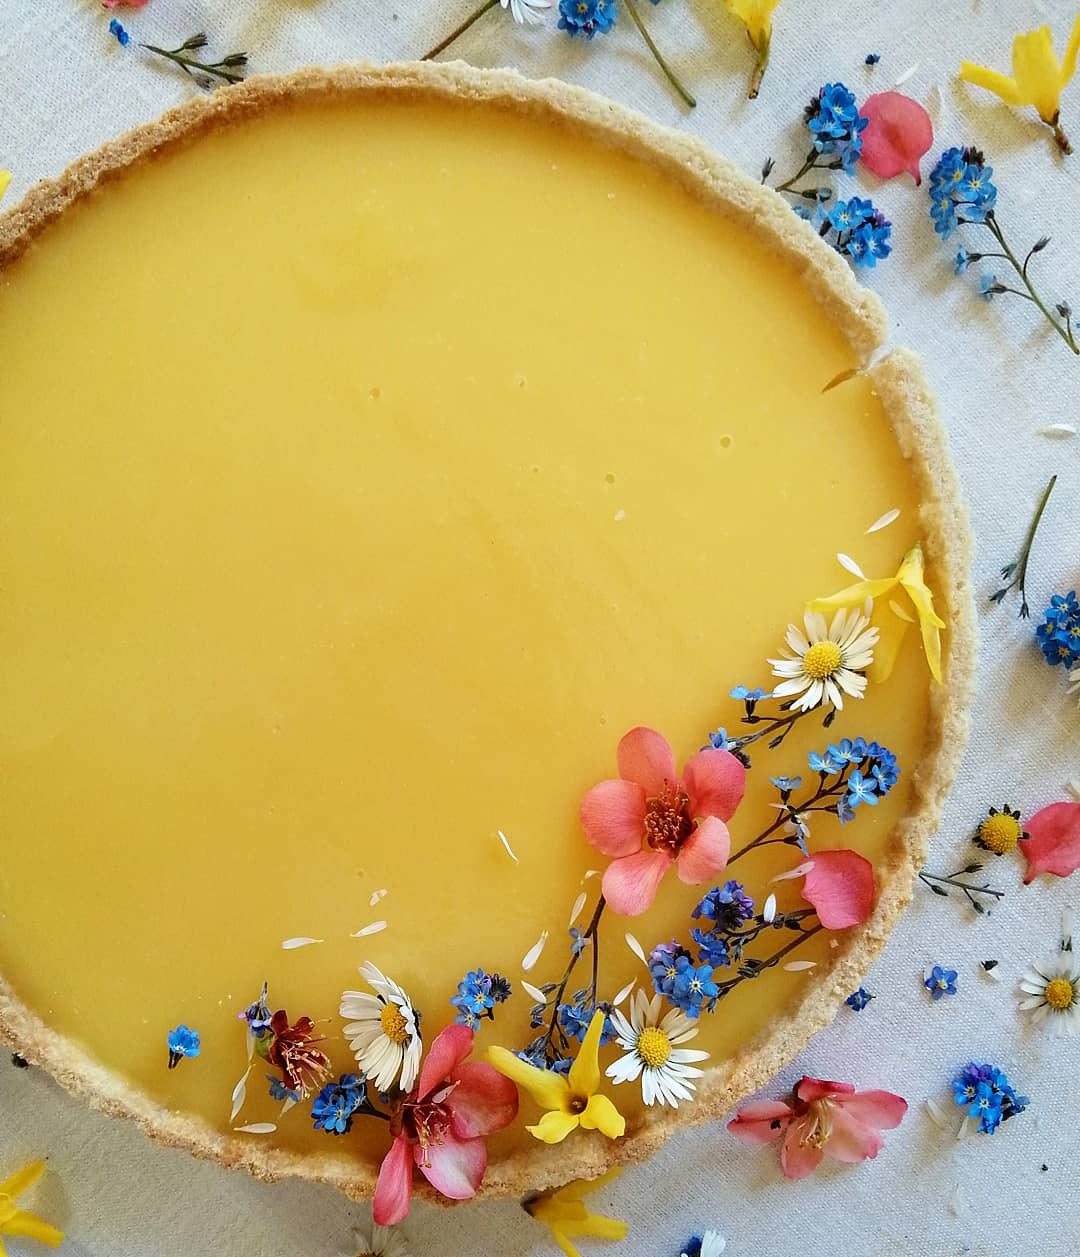 I Was Told This Was A Very Appropriate Post For This Sub, Homemade Vegan Lemon Tart Finished With Fresh Edible Flowers From My Garden